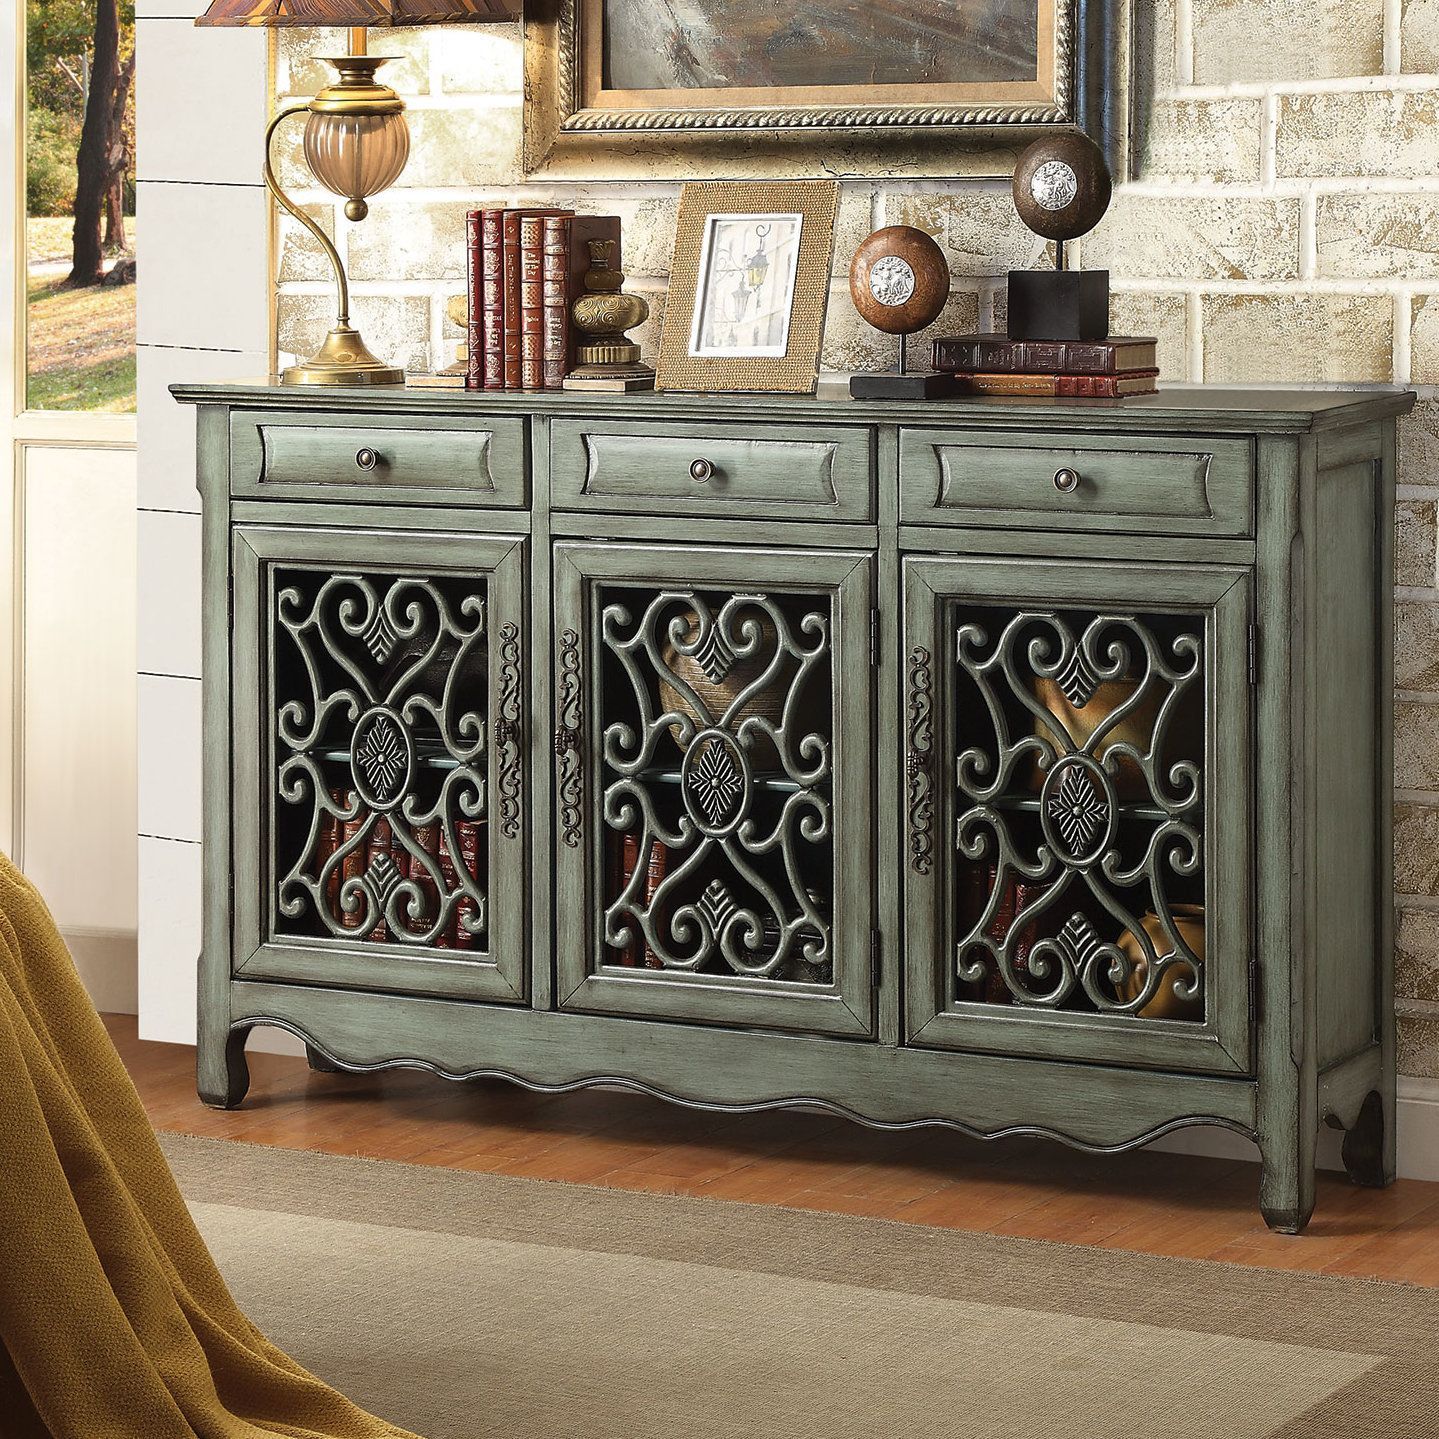 Helvic 3 Drawer 3 Door Accent Cabinet | Farmhouse Furniture Intended For Latest Mauzy Sideboards (View 7 of 20)